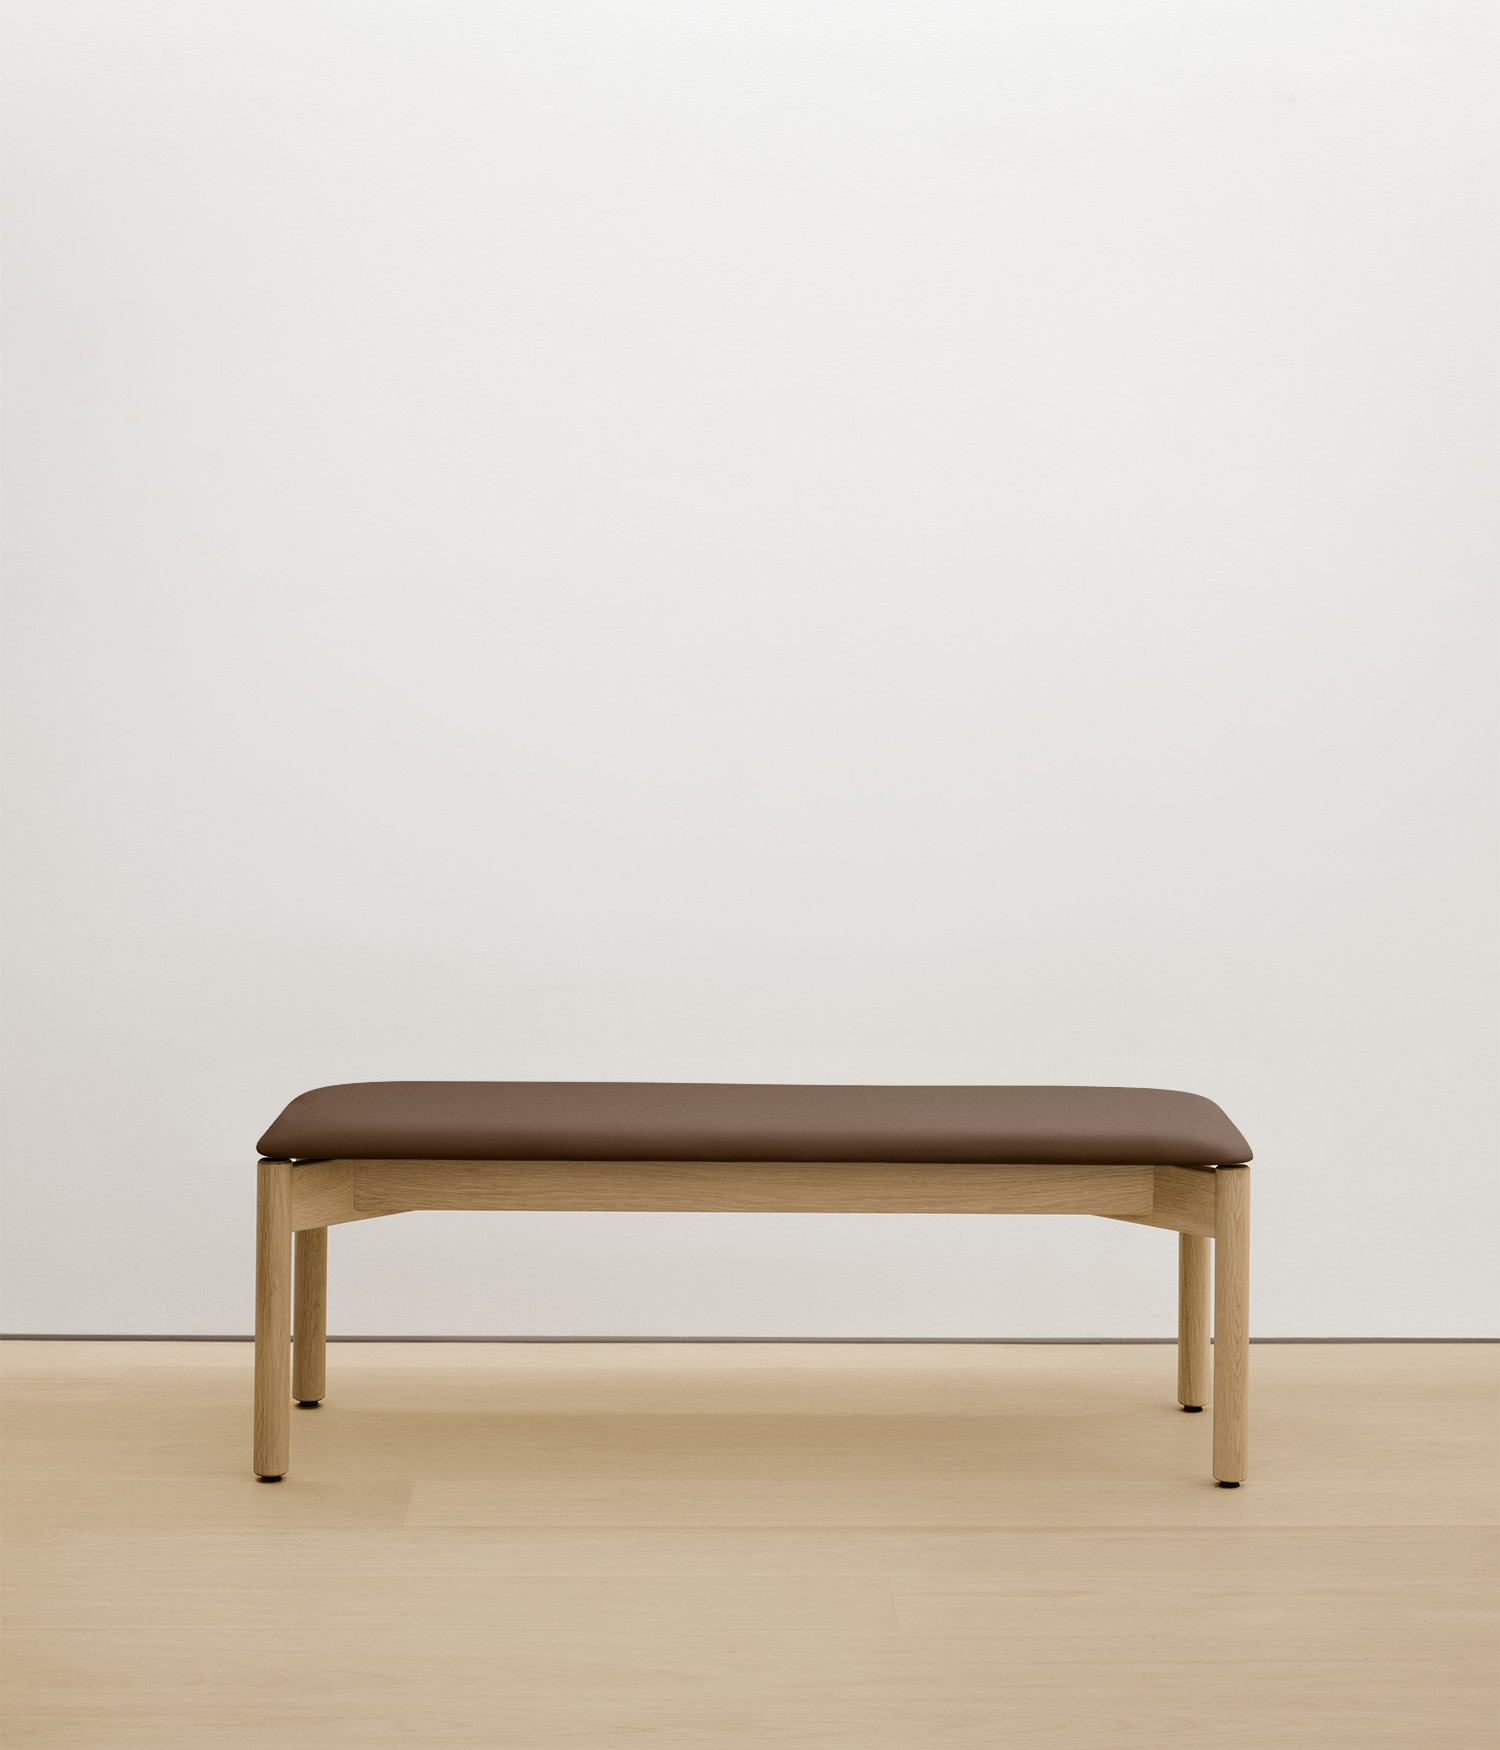  white-oak bench with umber color upholstered seat